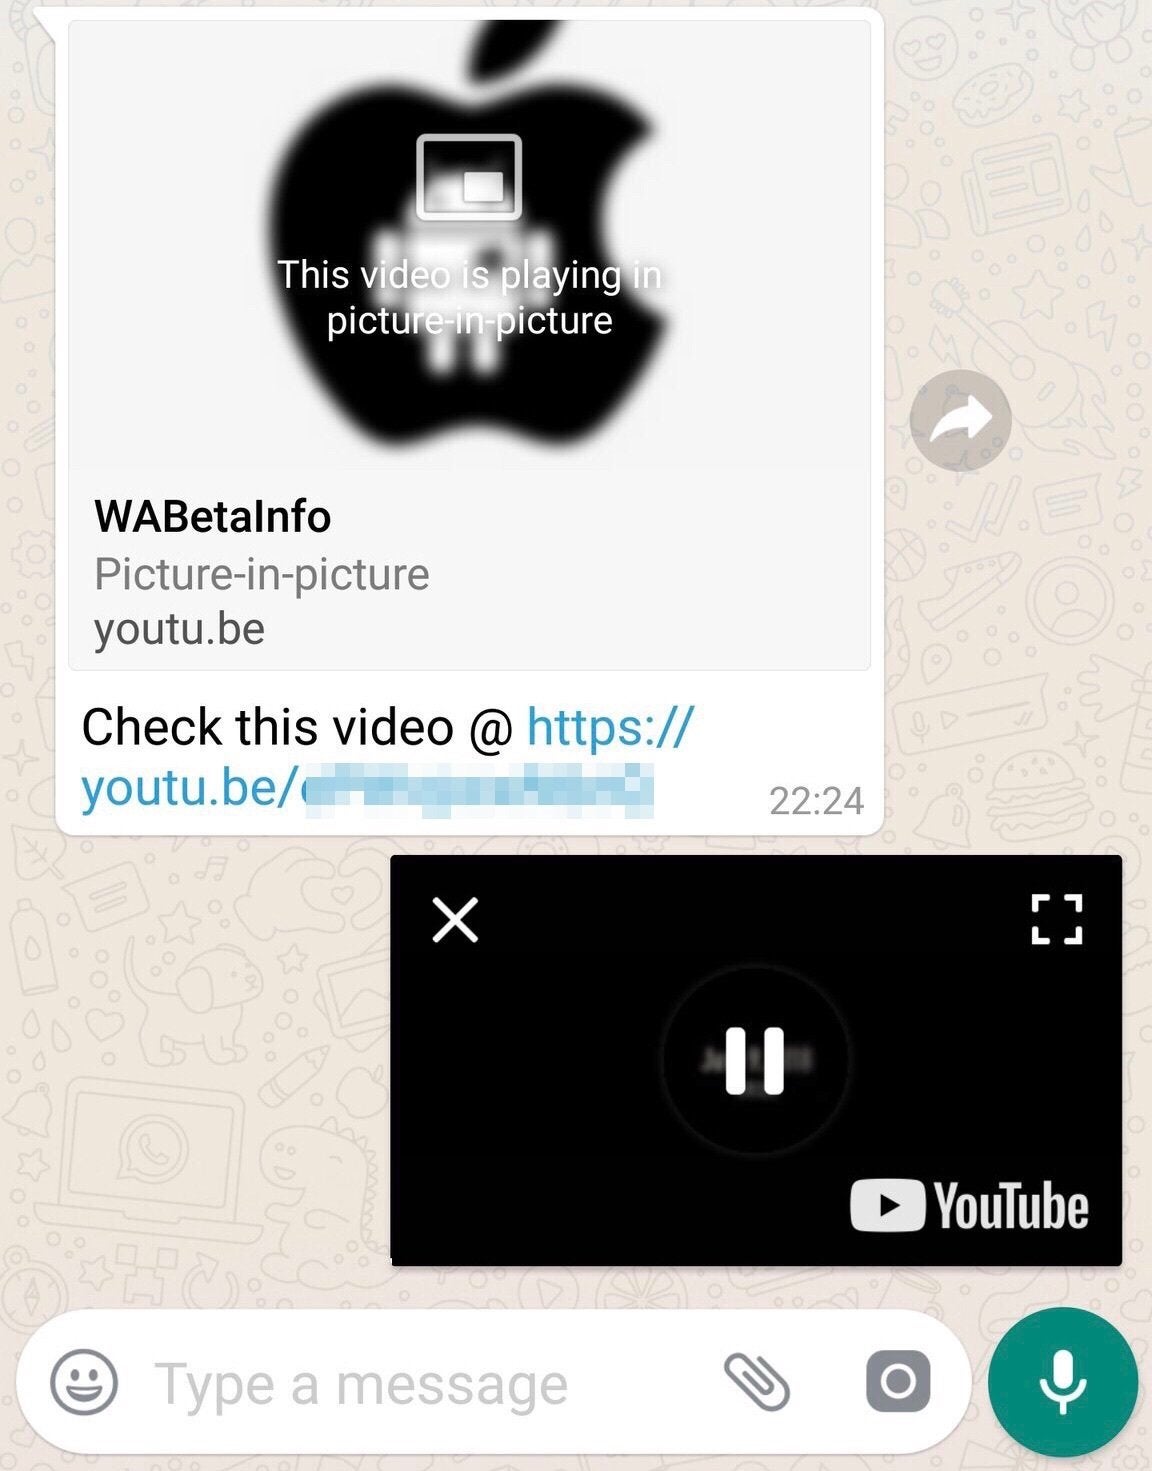 WhatsApp for Android gains Picture-in-Picture mode in latest update